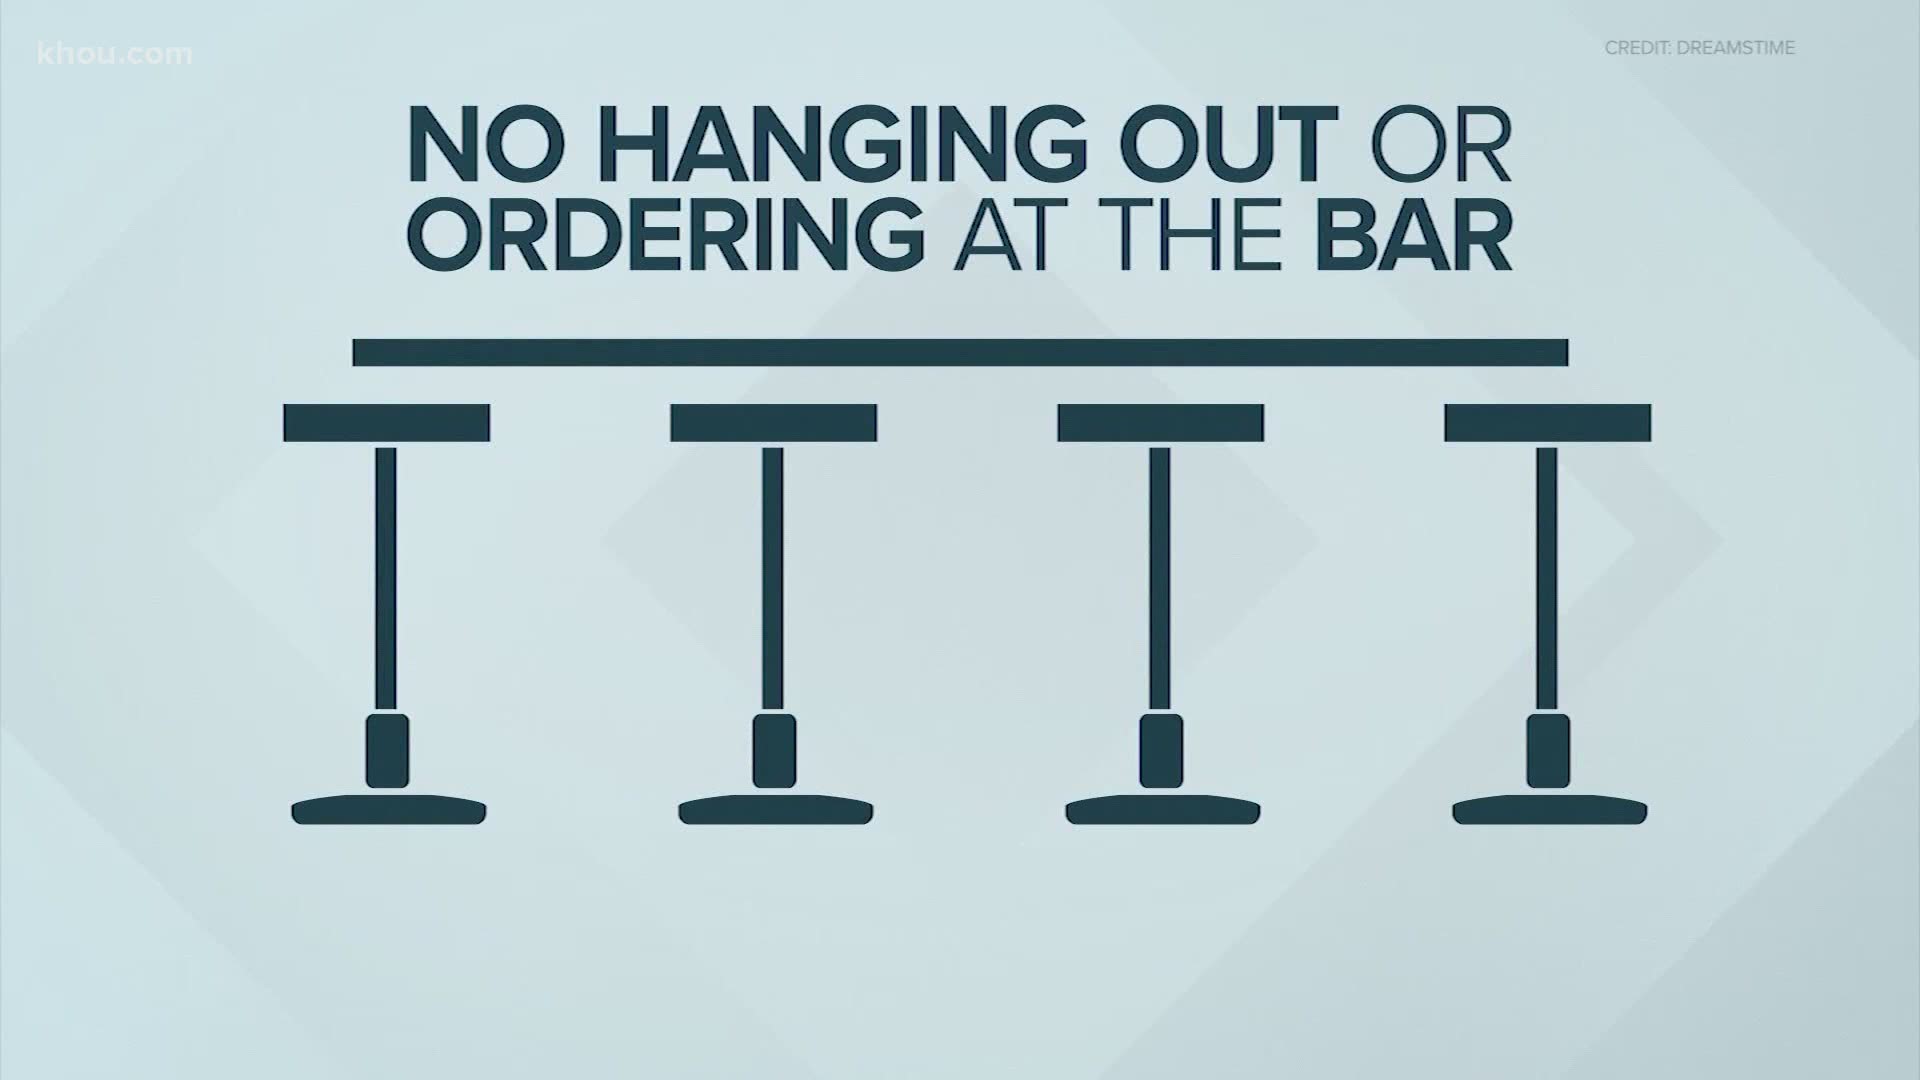 The reopening of bars marks the state's second phase of the governor's timeline for the economy.